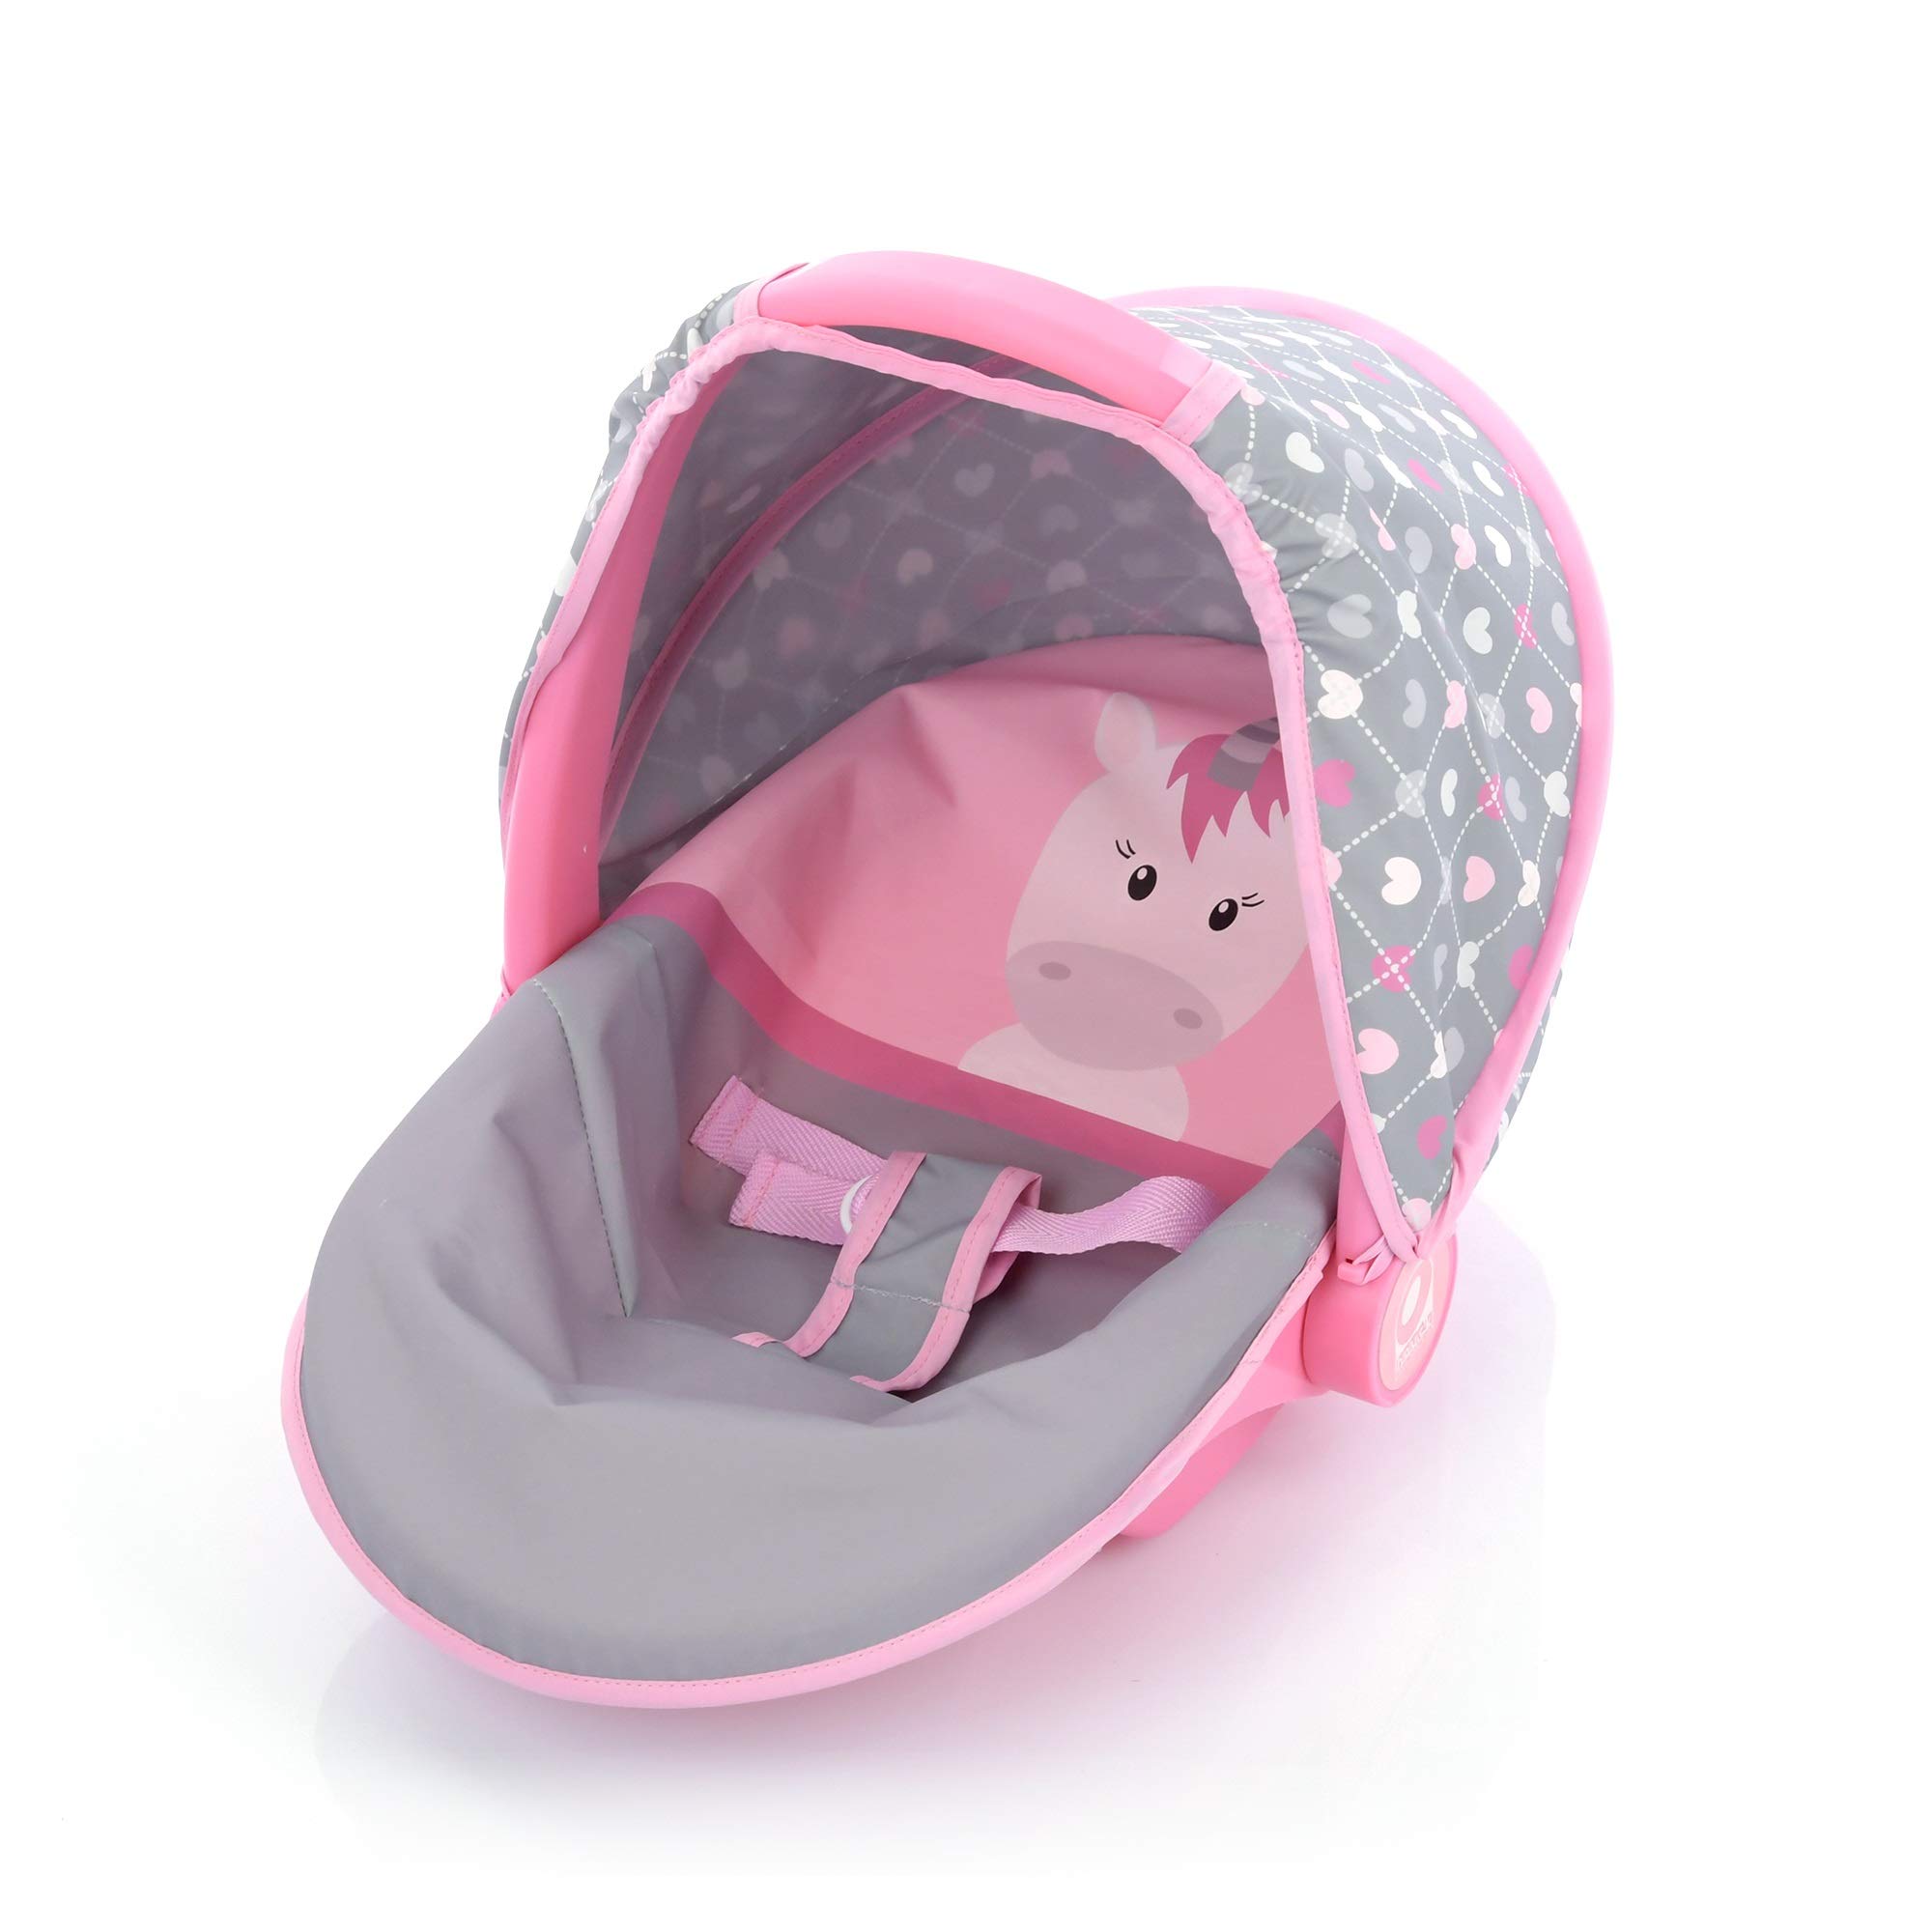 Hauck 2 in 1 Doll Travel System